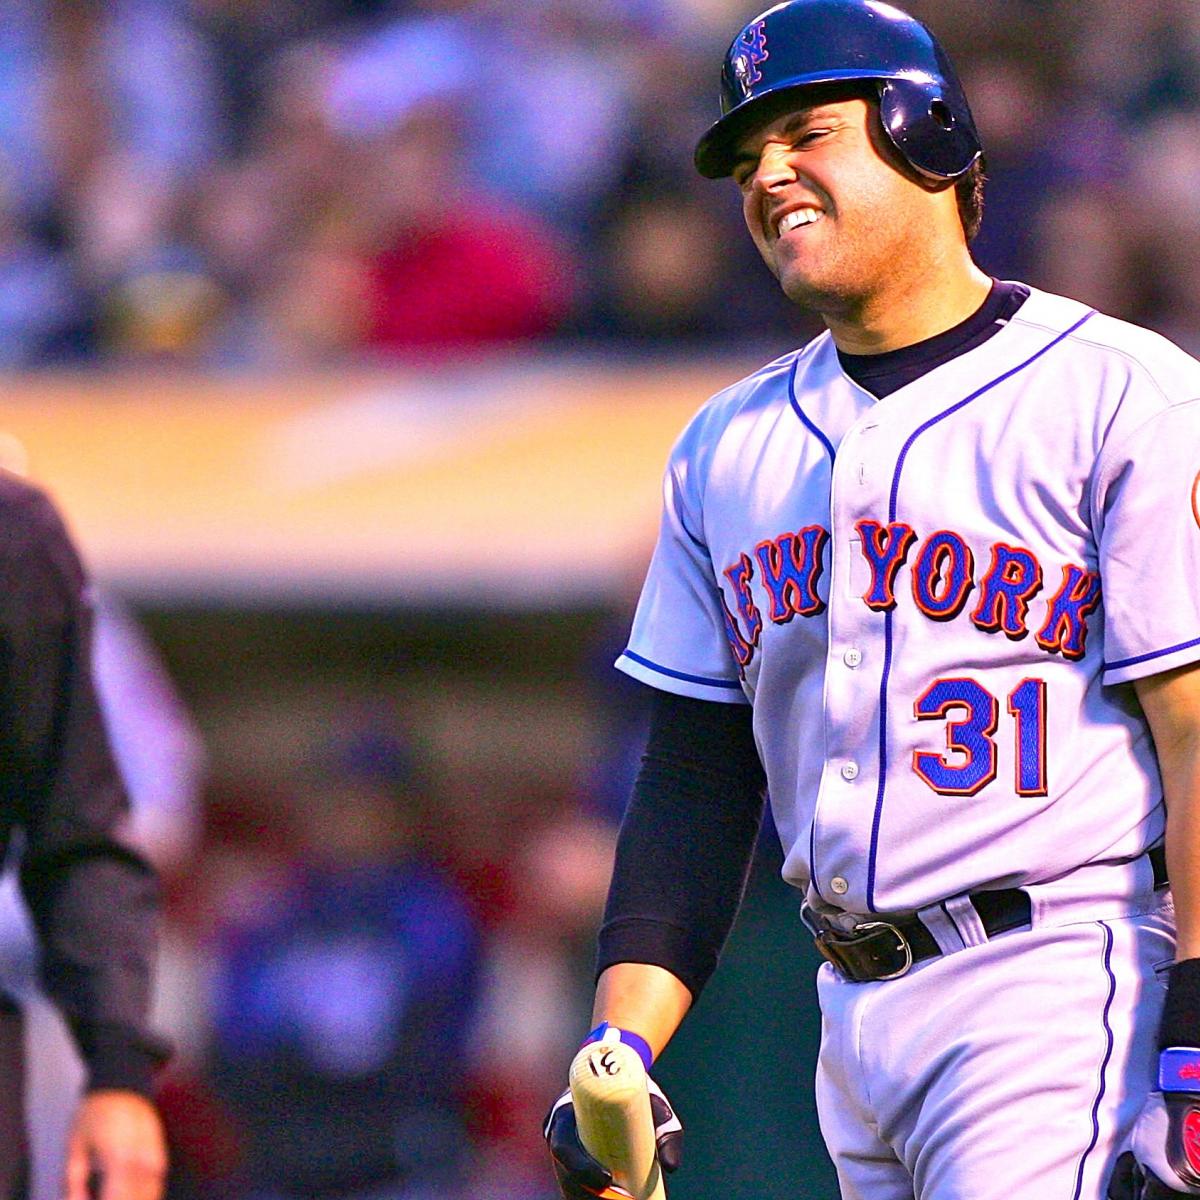 Ranking the 2013 Hall of Fame candidates: No. 4, Mike Piazza